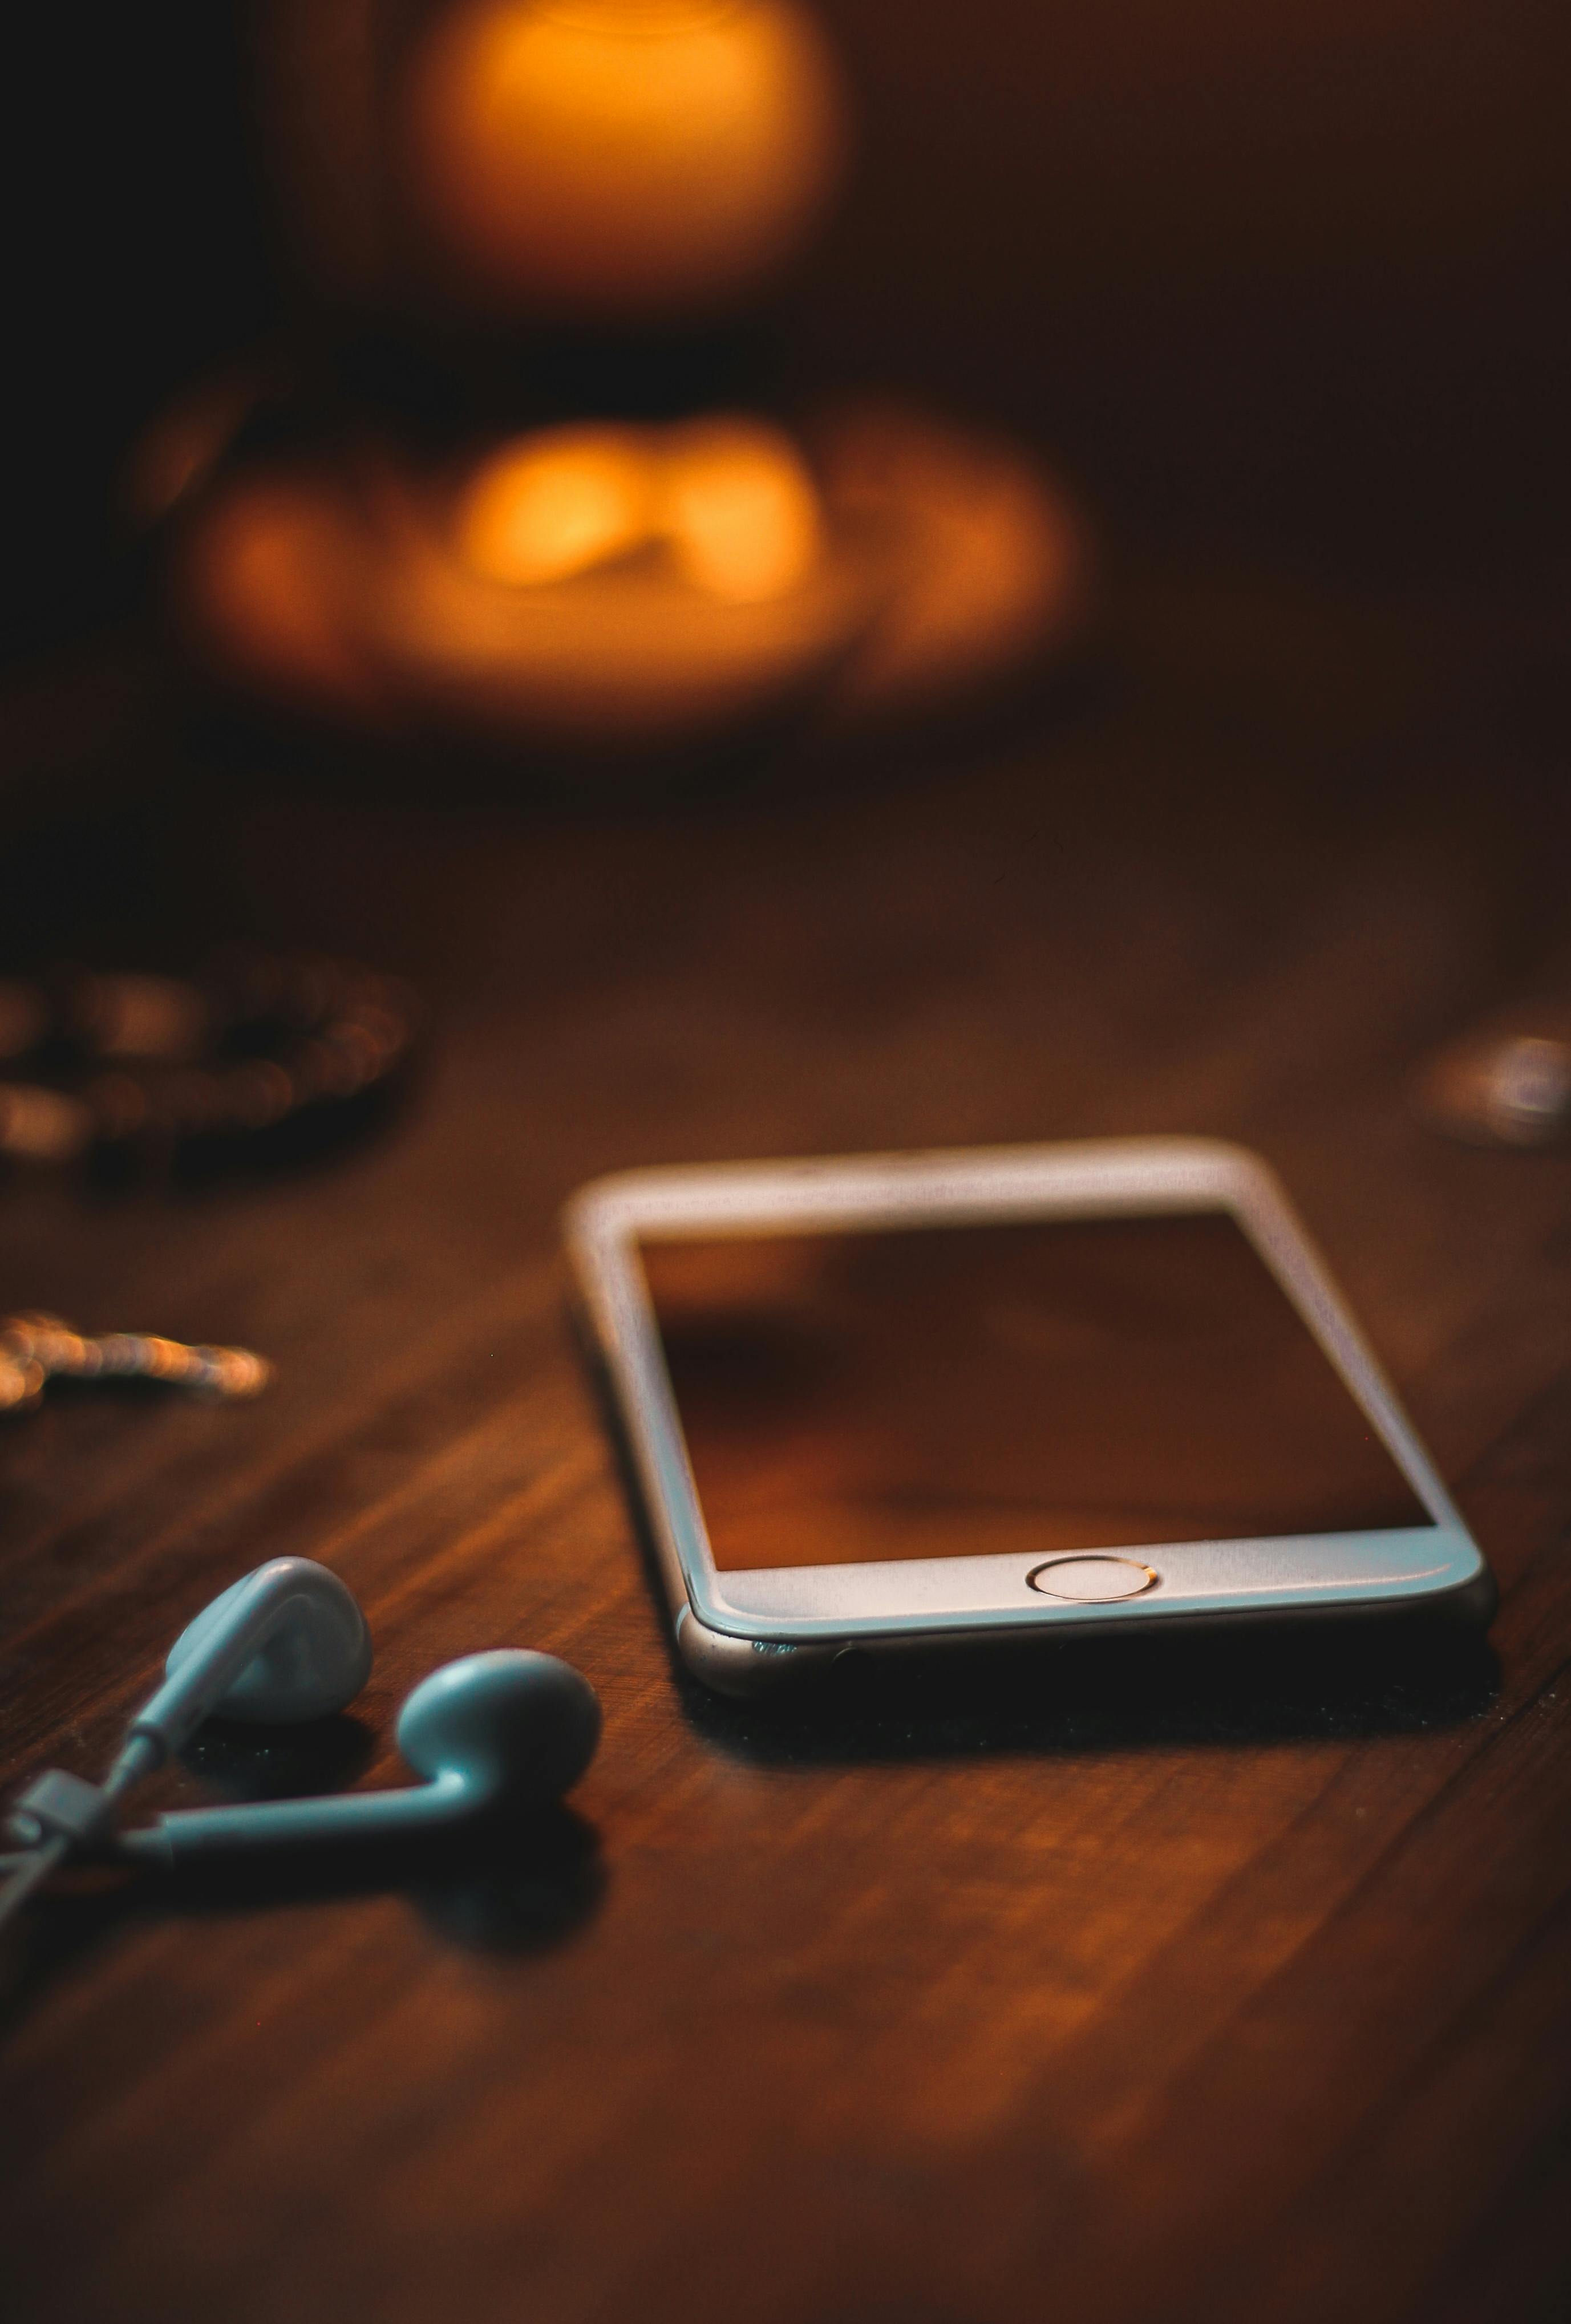 A phone on a table | Source: Pexels